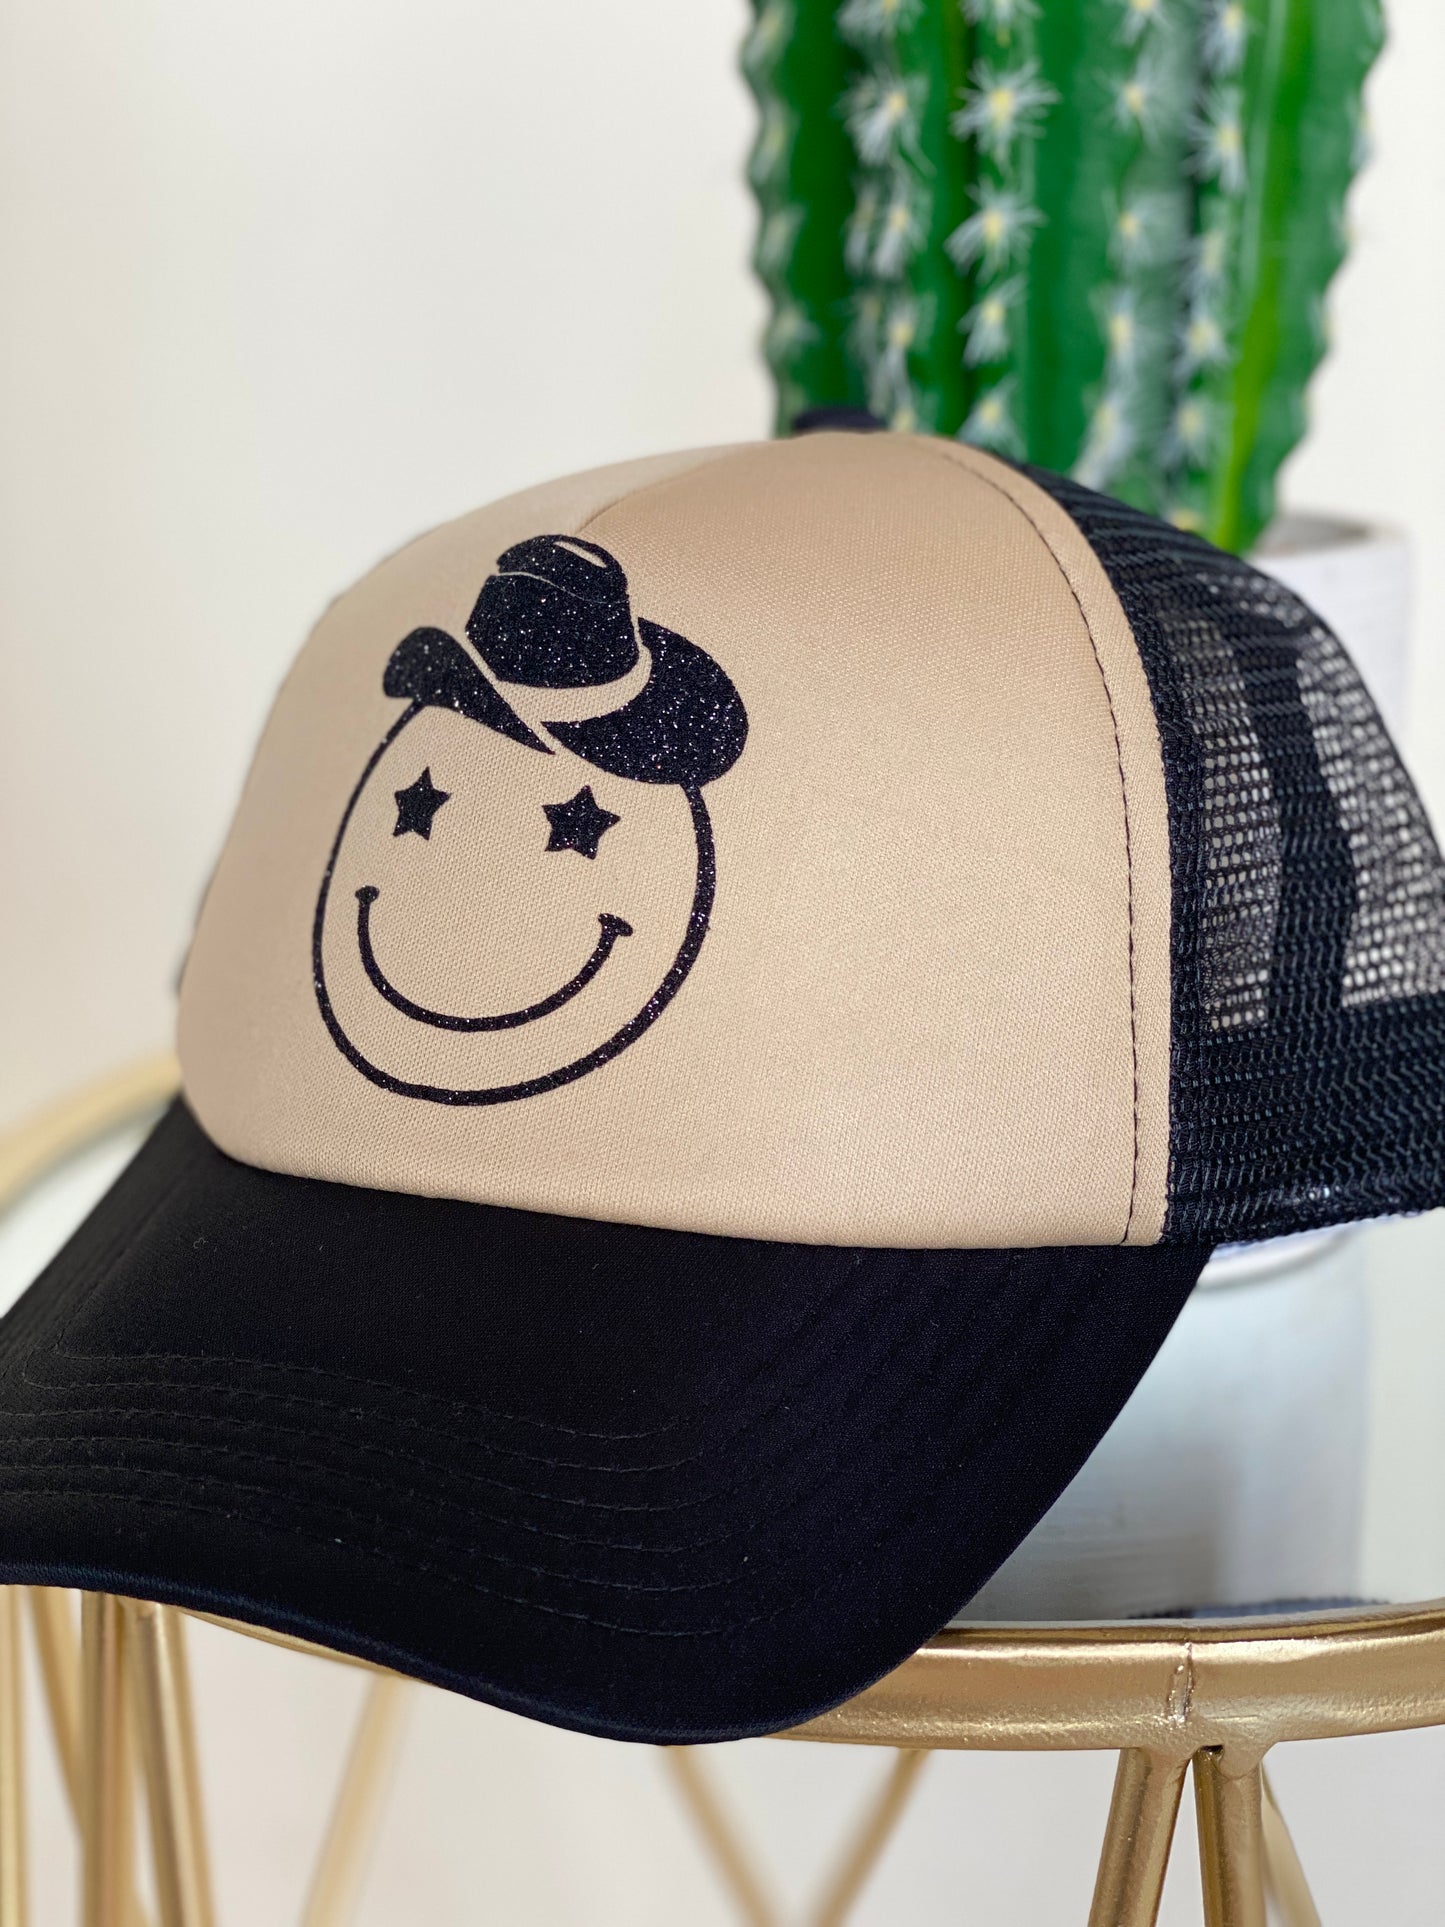 Howdy Smiley Trucker Hat - Tan and Black